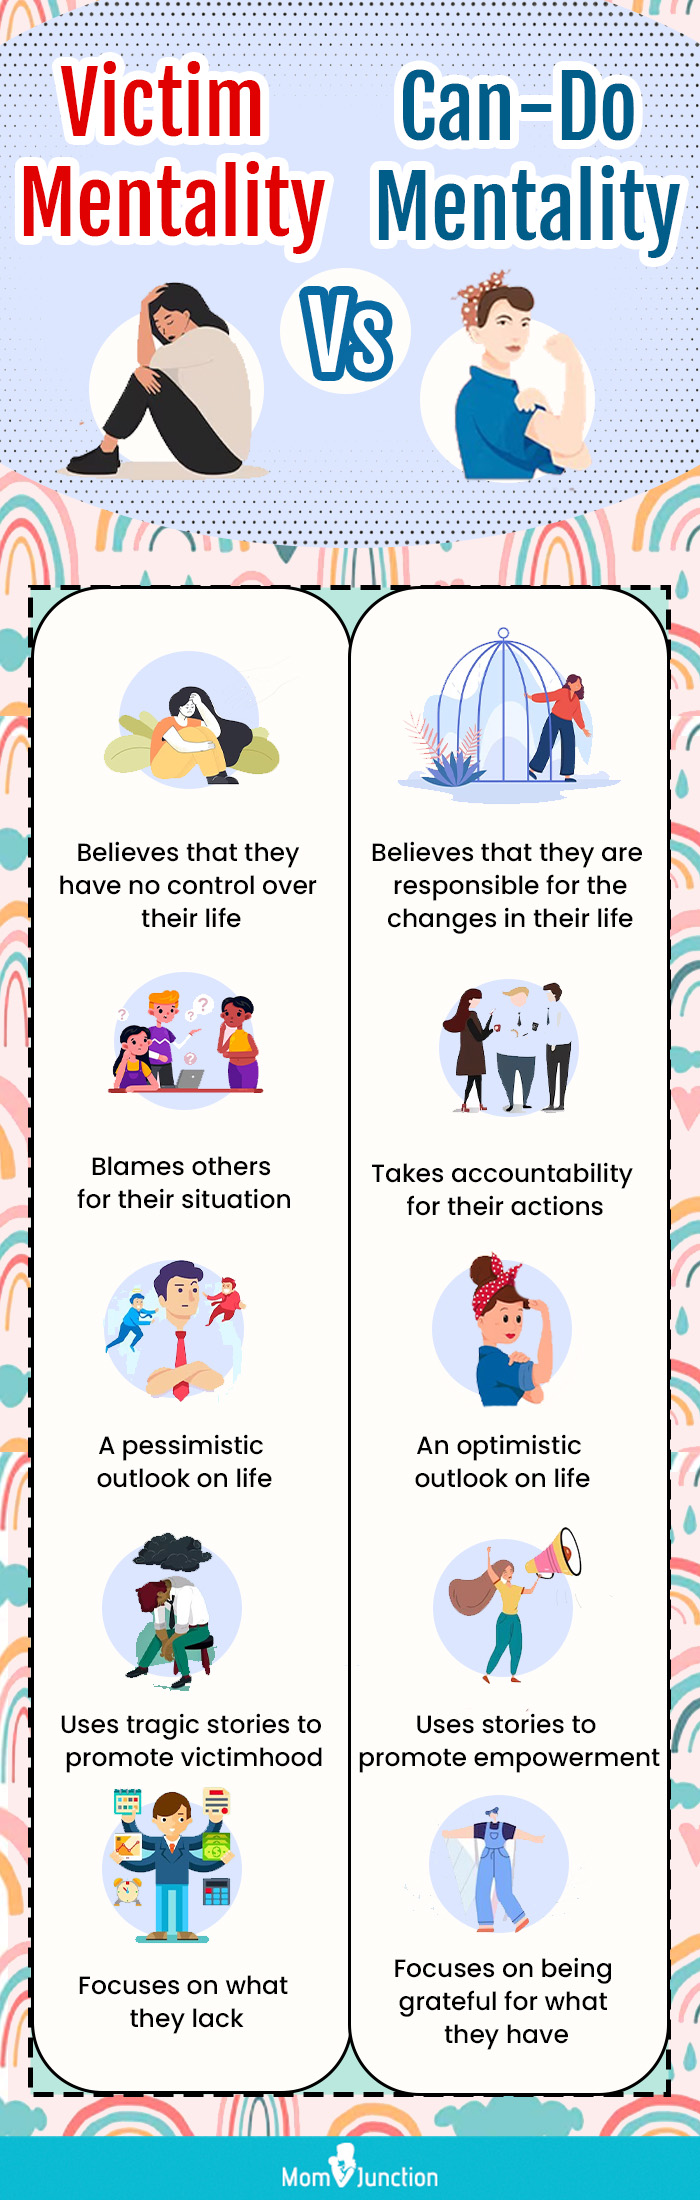 victim mentality vs can do mentality (infographic)